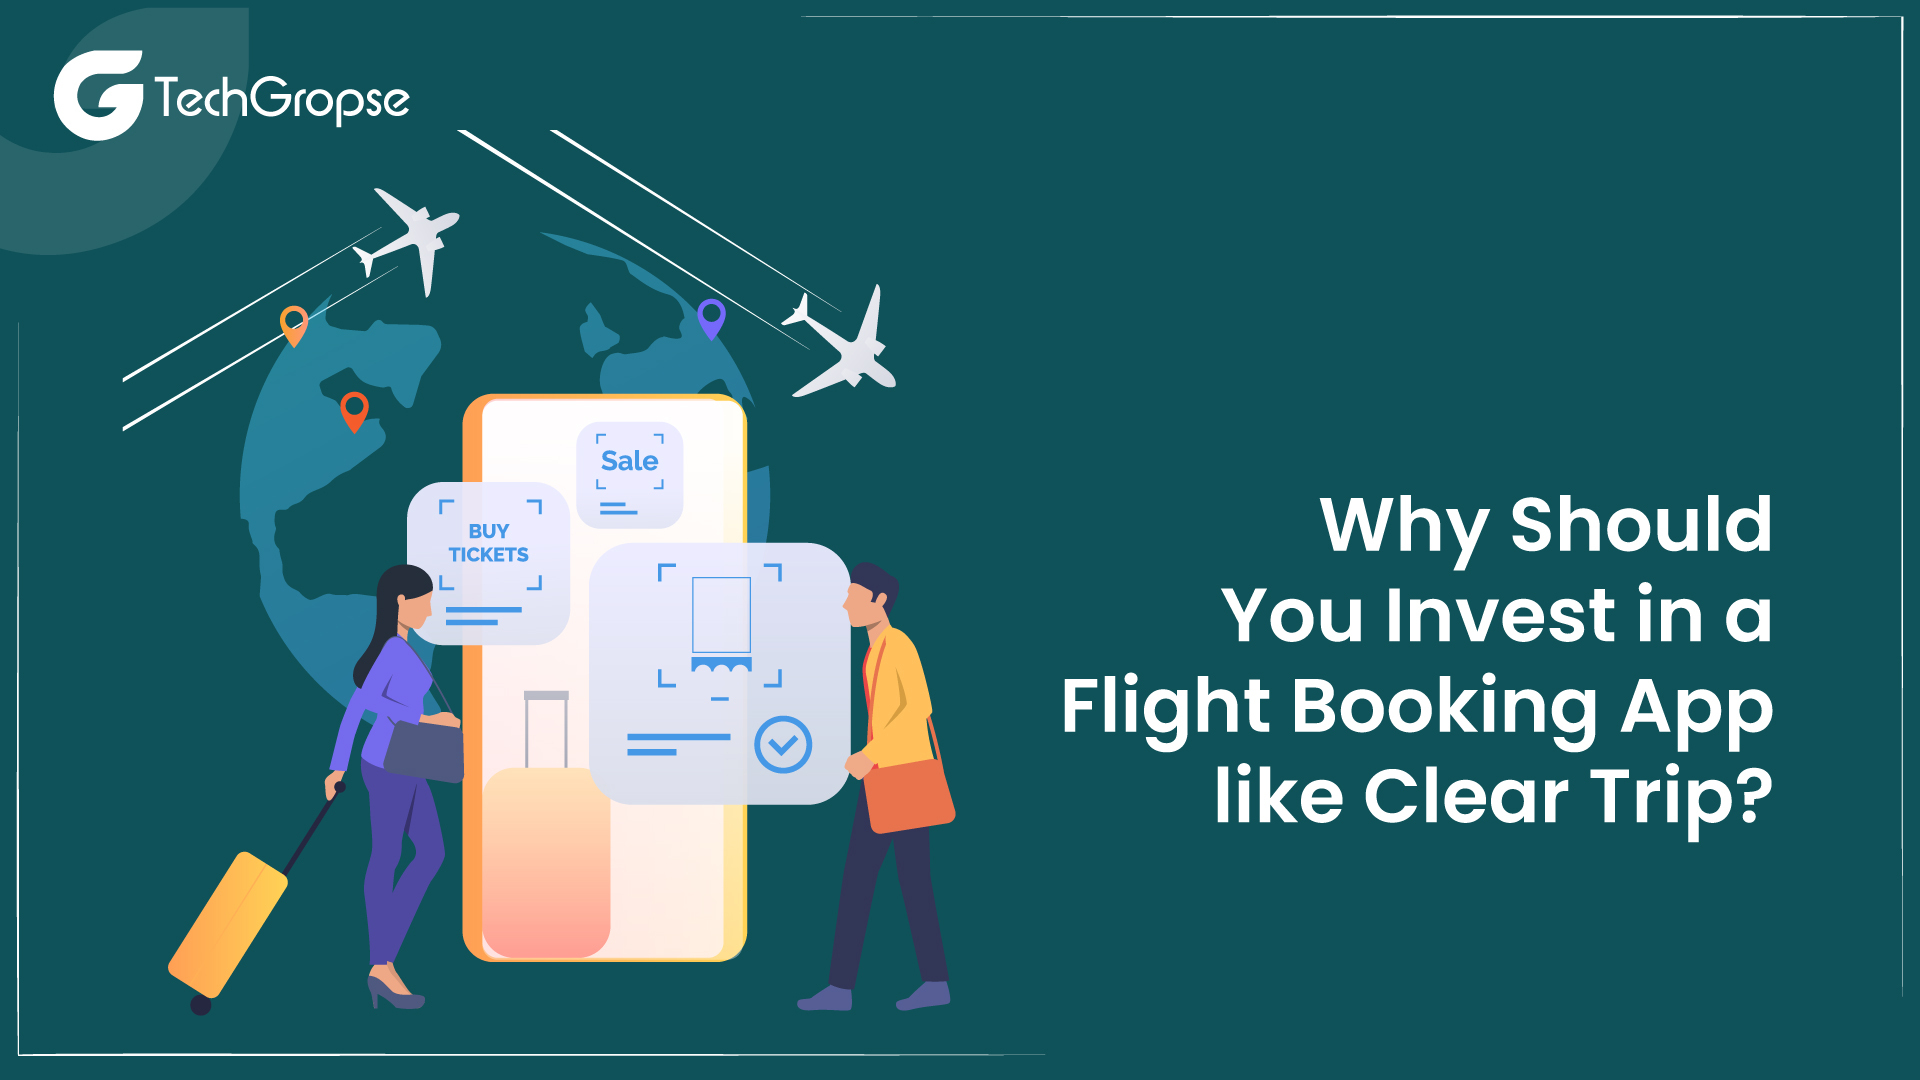 Why Should You Invest in a Flight Booking App like Clear Trip?